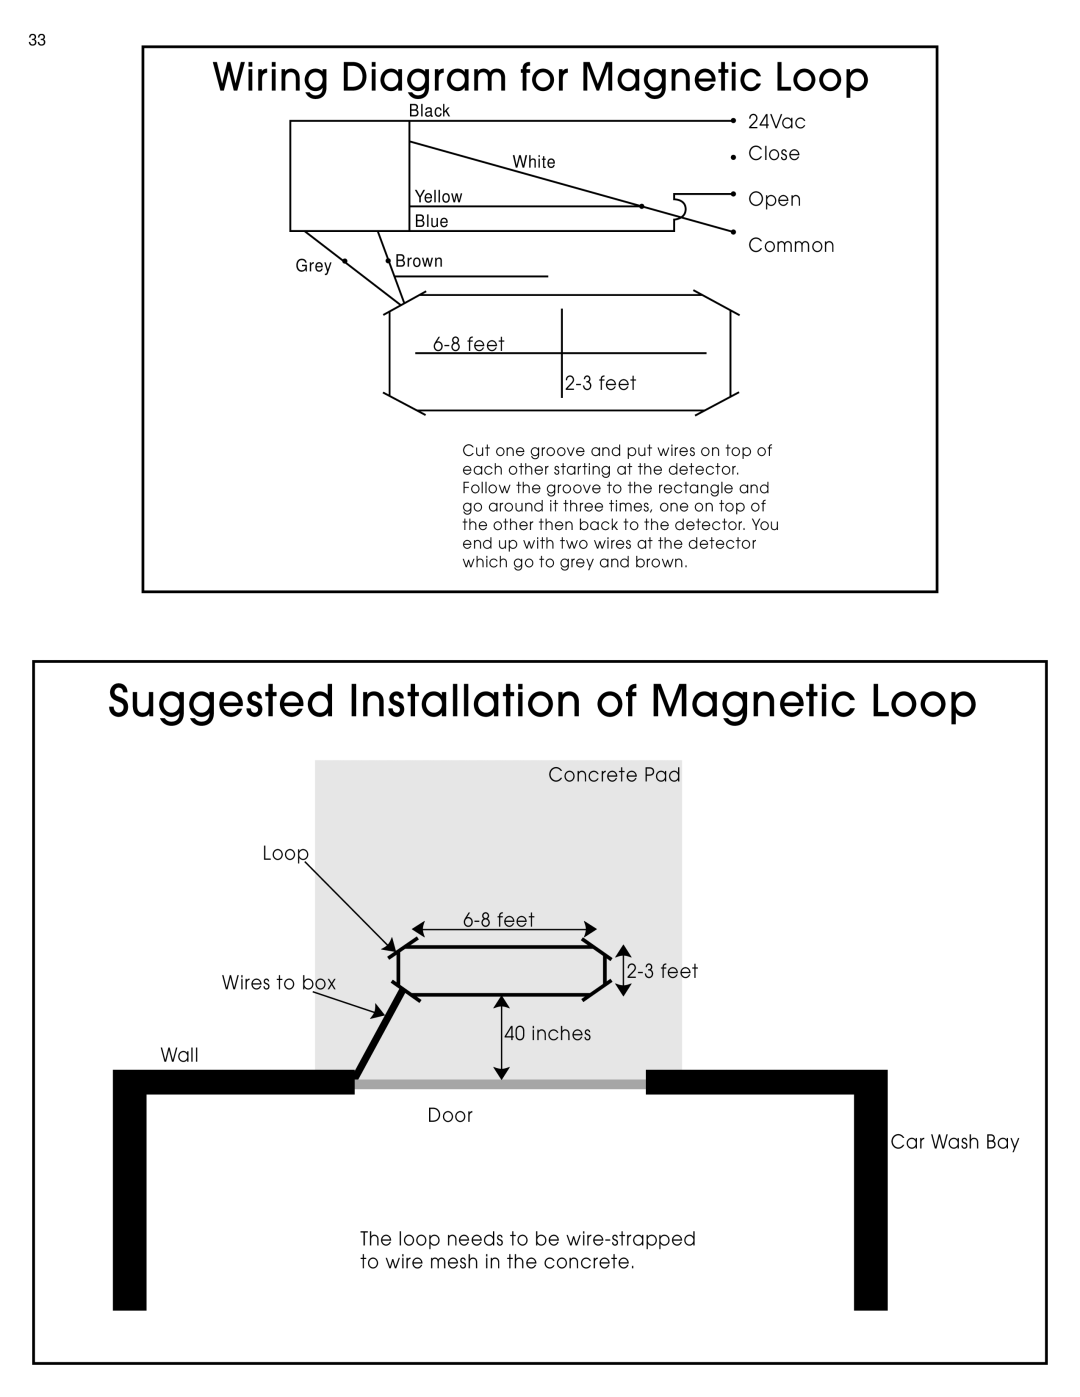 Ultimate Products UP-206 Suggested Installation of Magnetic Loop, Wiring Diagram for Magnetic Loop, 24Vac, Close, Open 